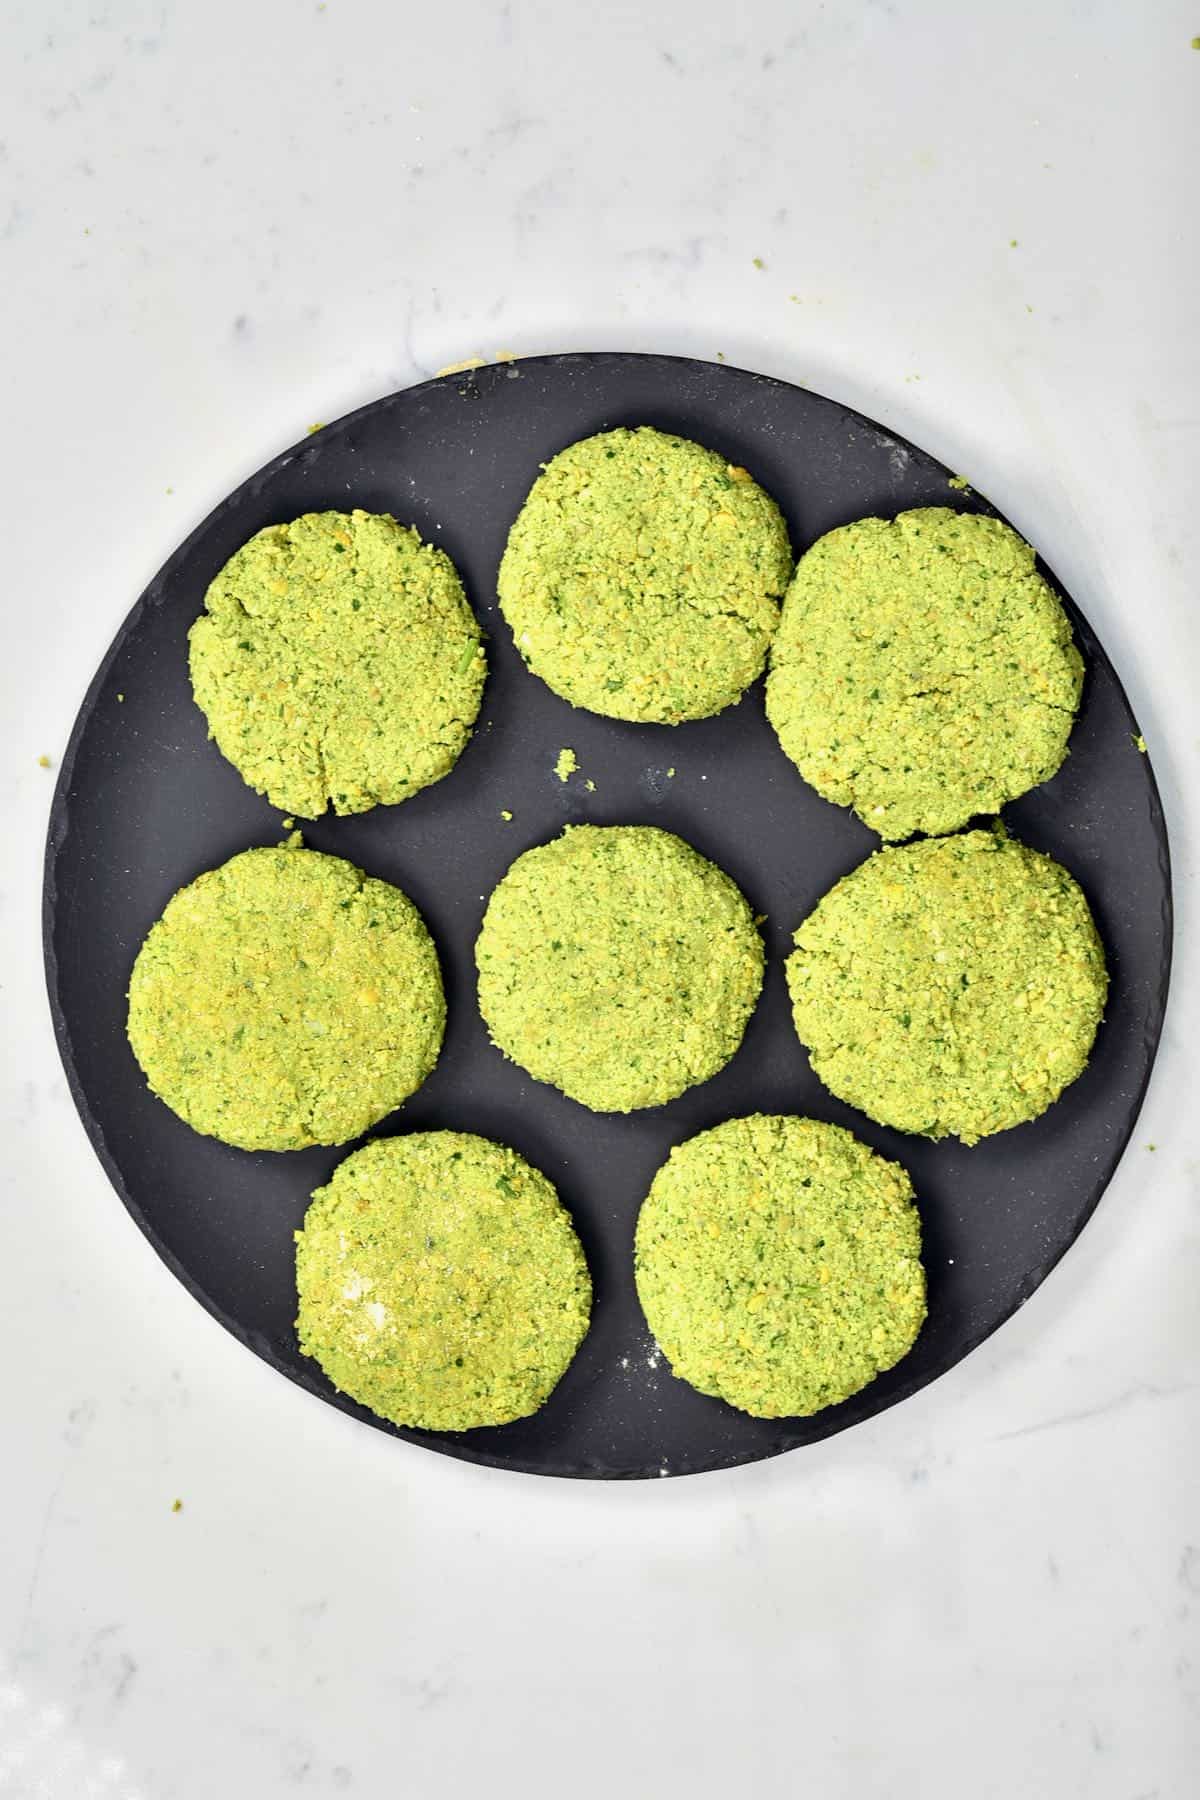 Eight uncooked falafel patties on a black plate